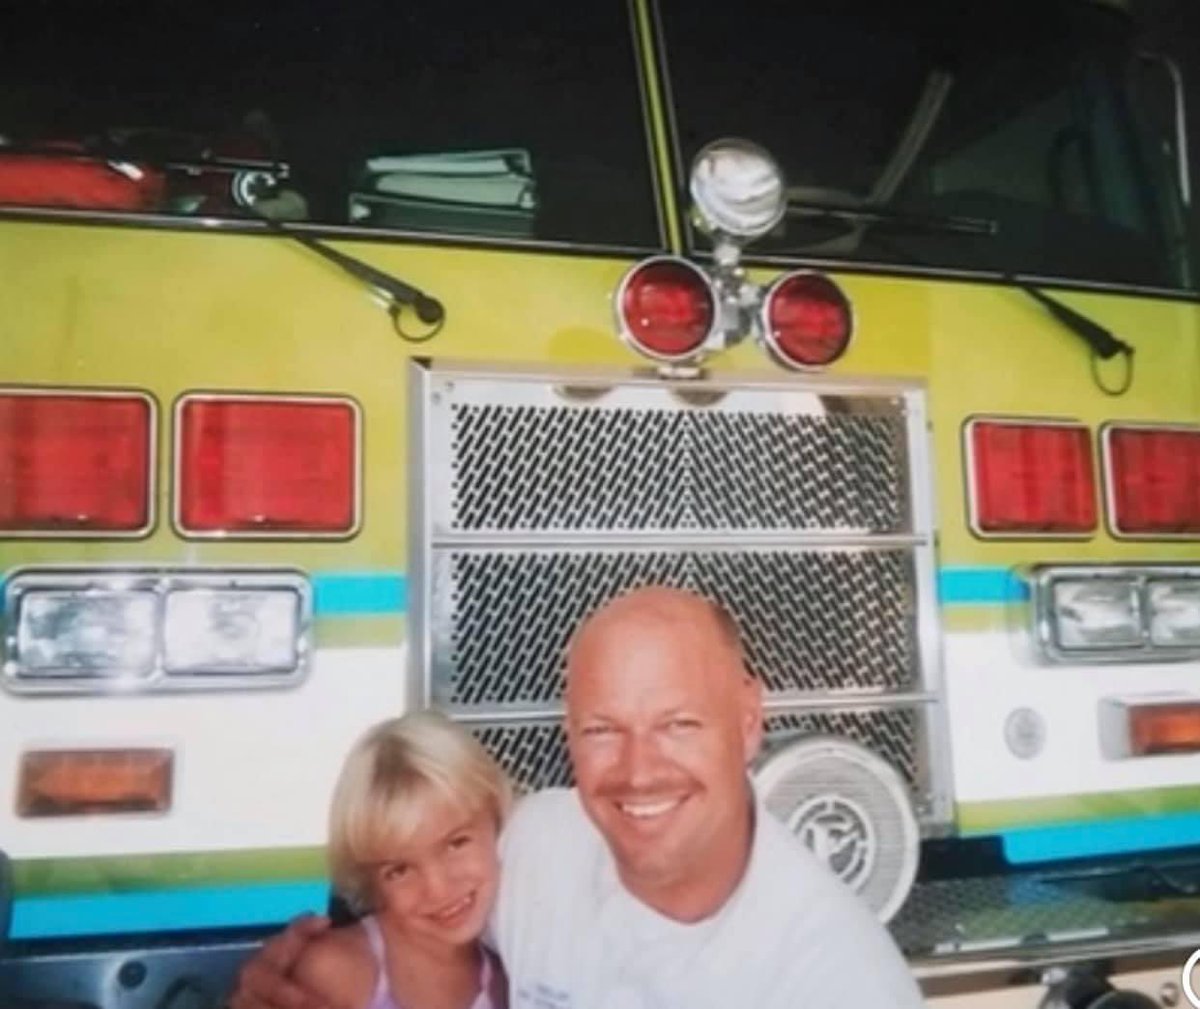 Happy #InternationalFirefightersDay to all of the awesome heroes out there, including my Dad! 🚒 
A huge THANK YOU to all of the first responders out there who risk their lives to keep our communities safe each and everyday.